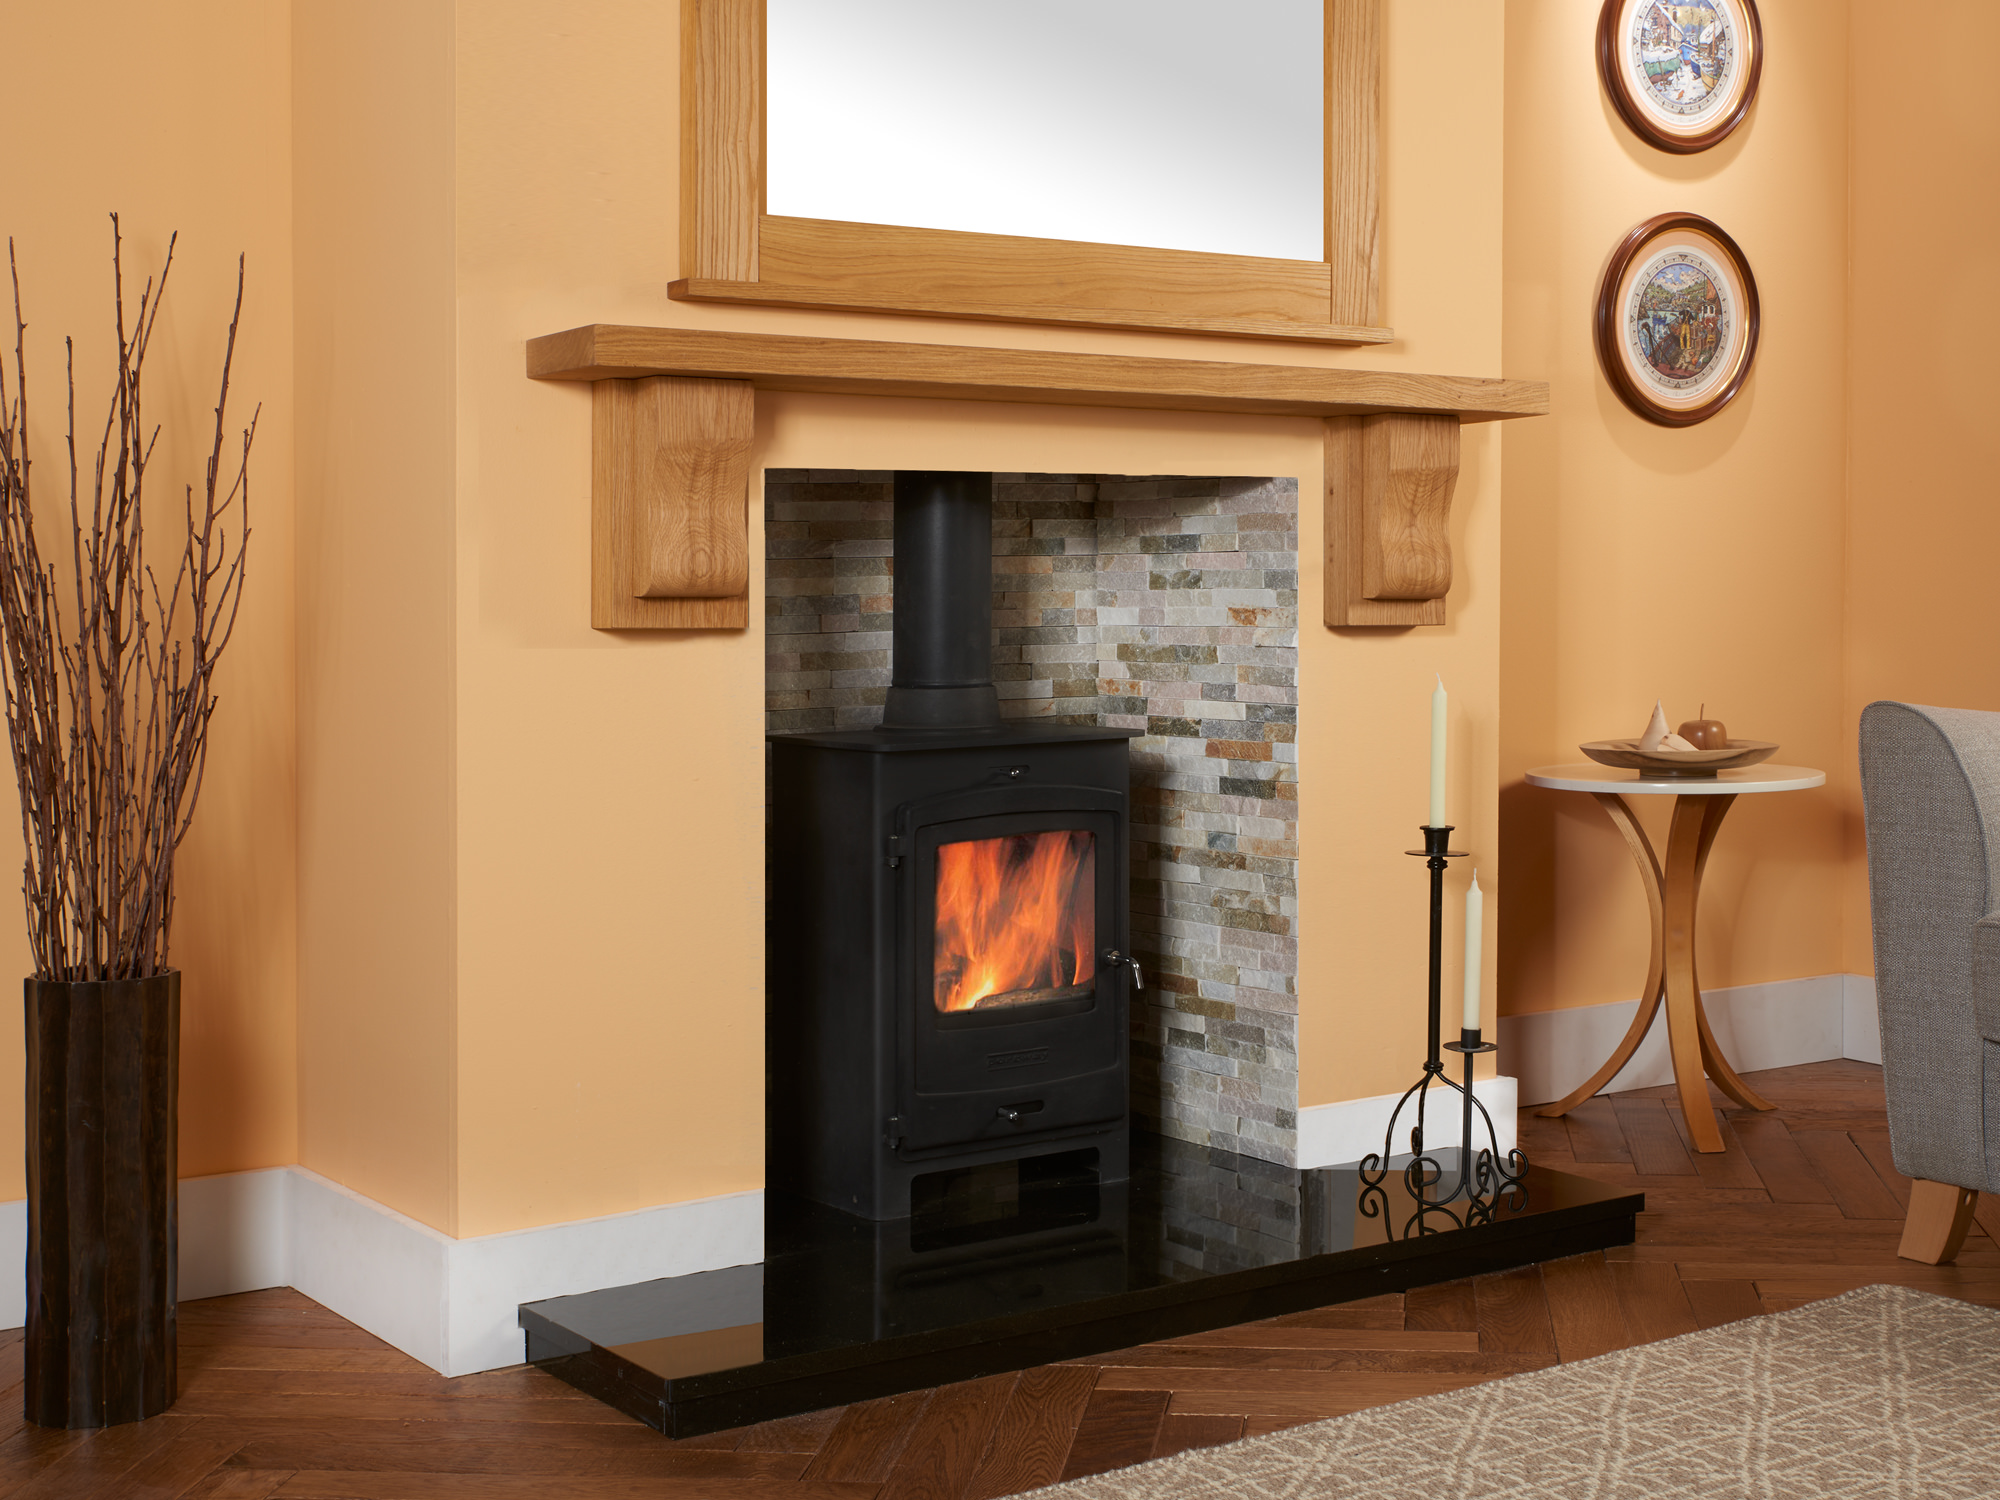 oak-shelf-with-corbels-above-stove